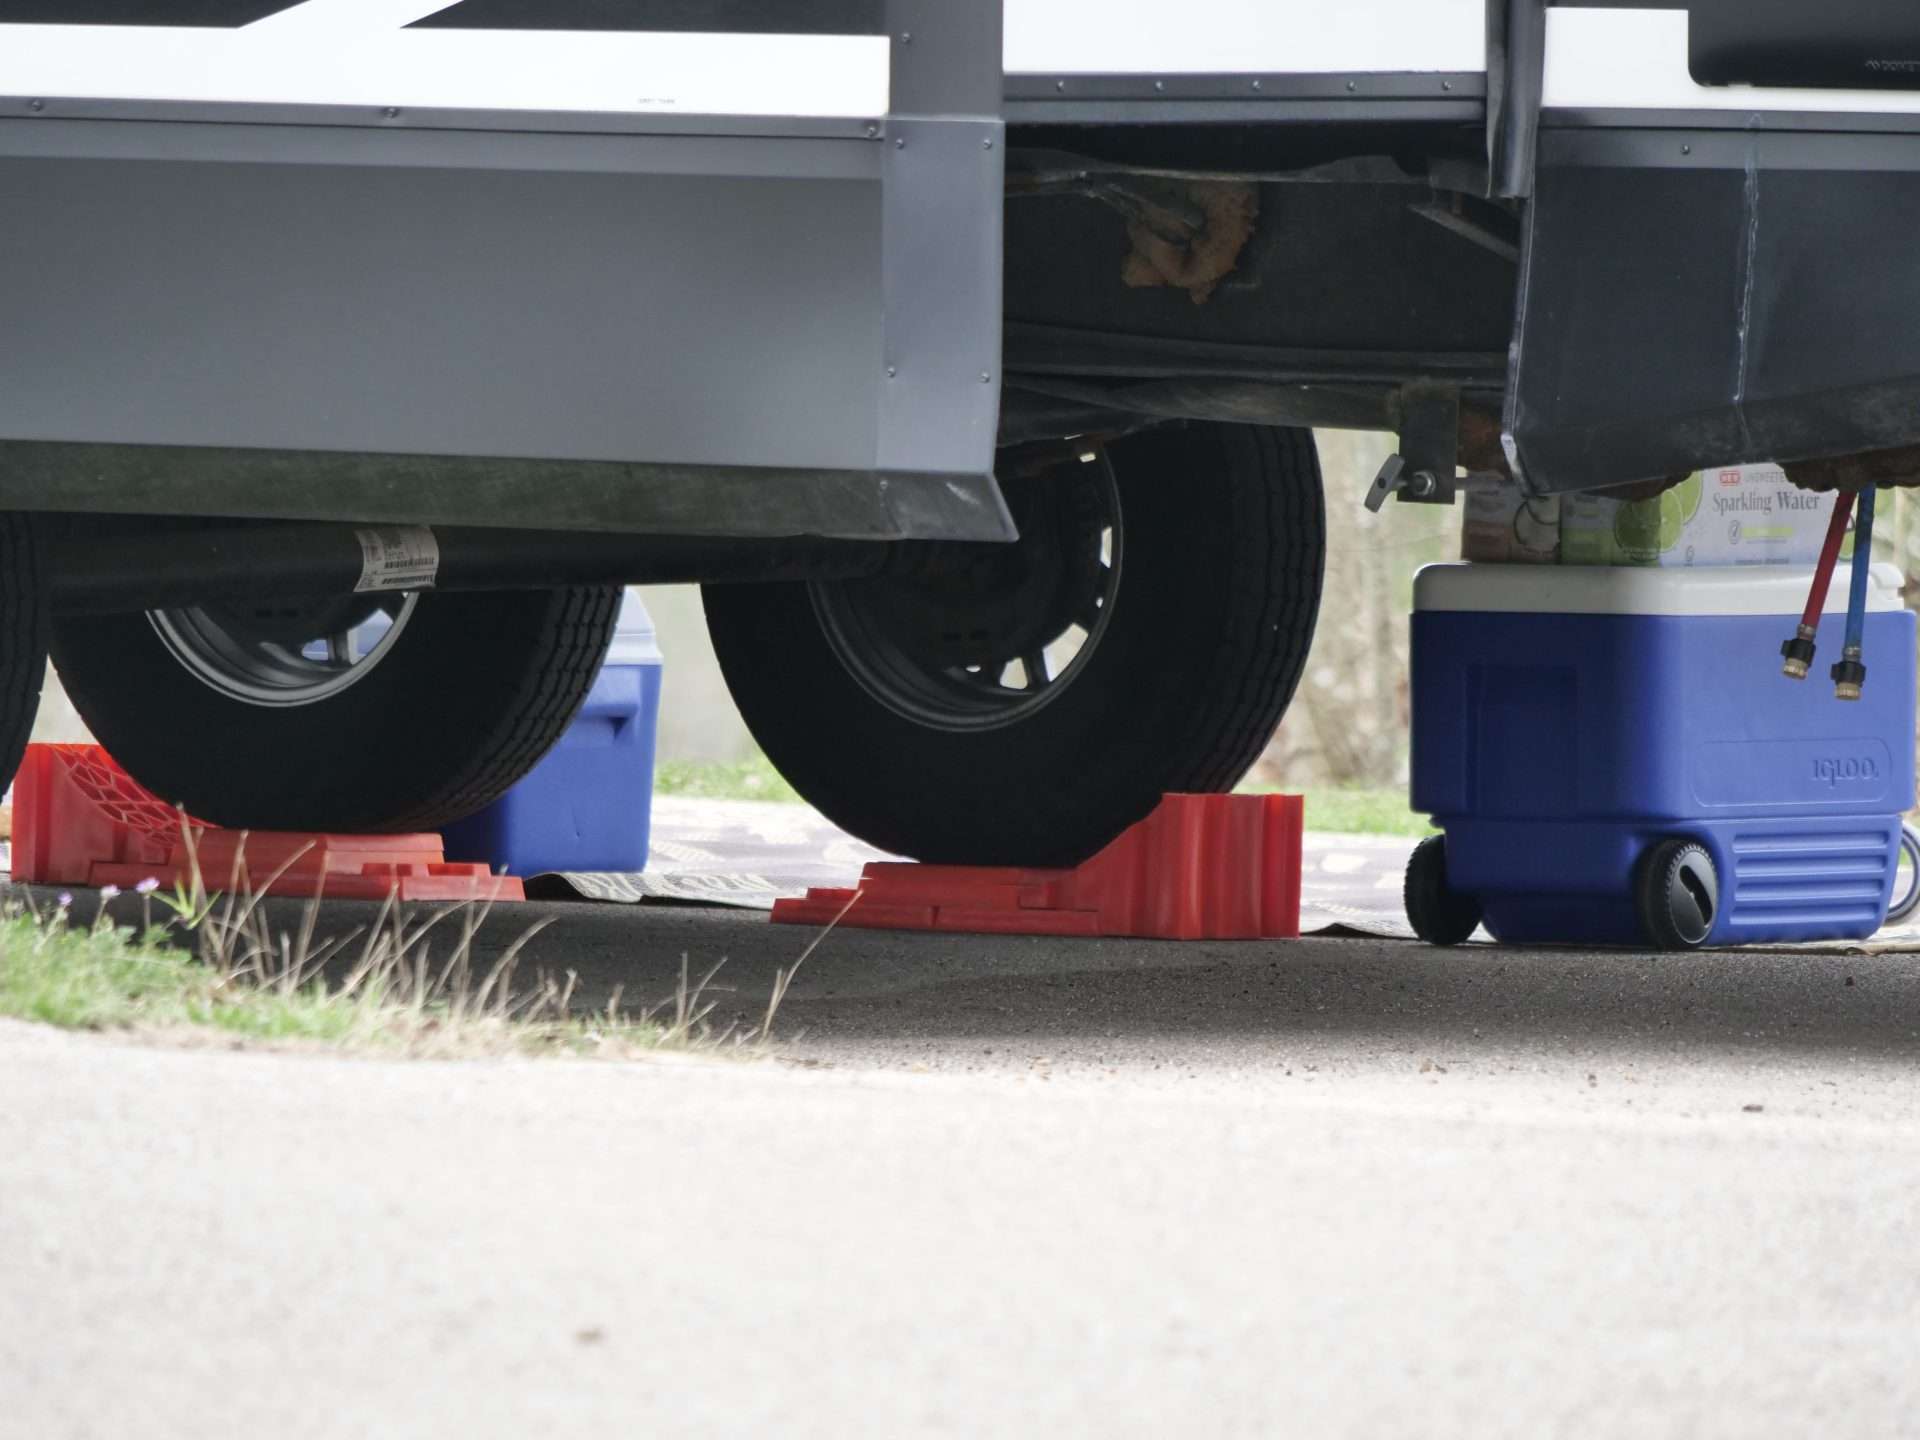 Close up of RV wheels parked on block levelers